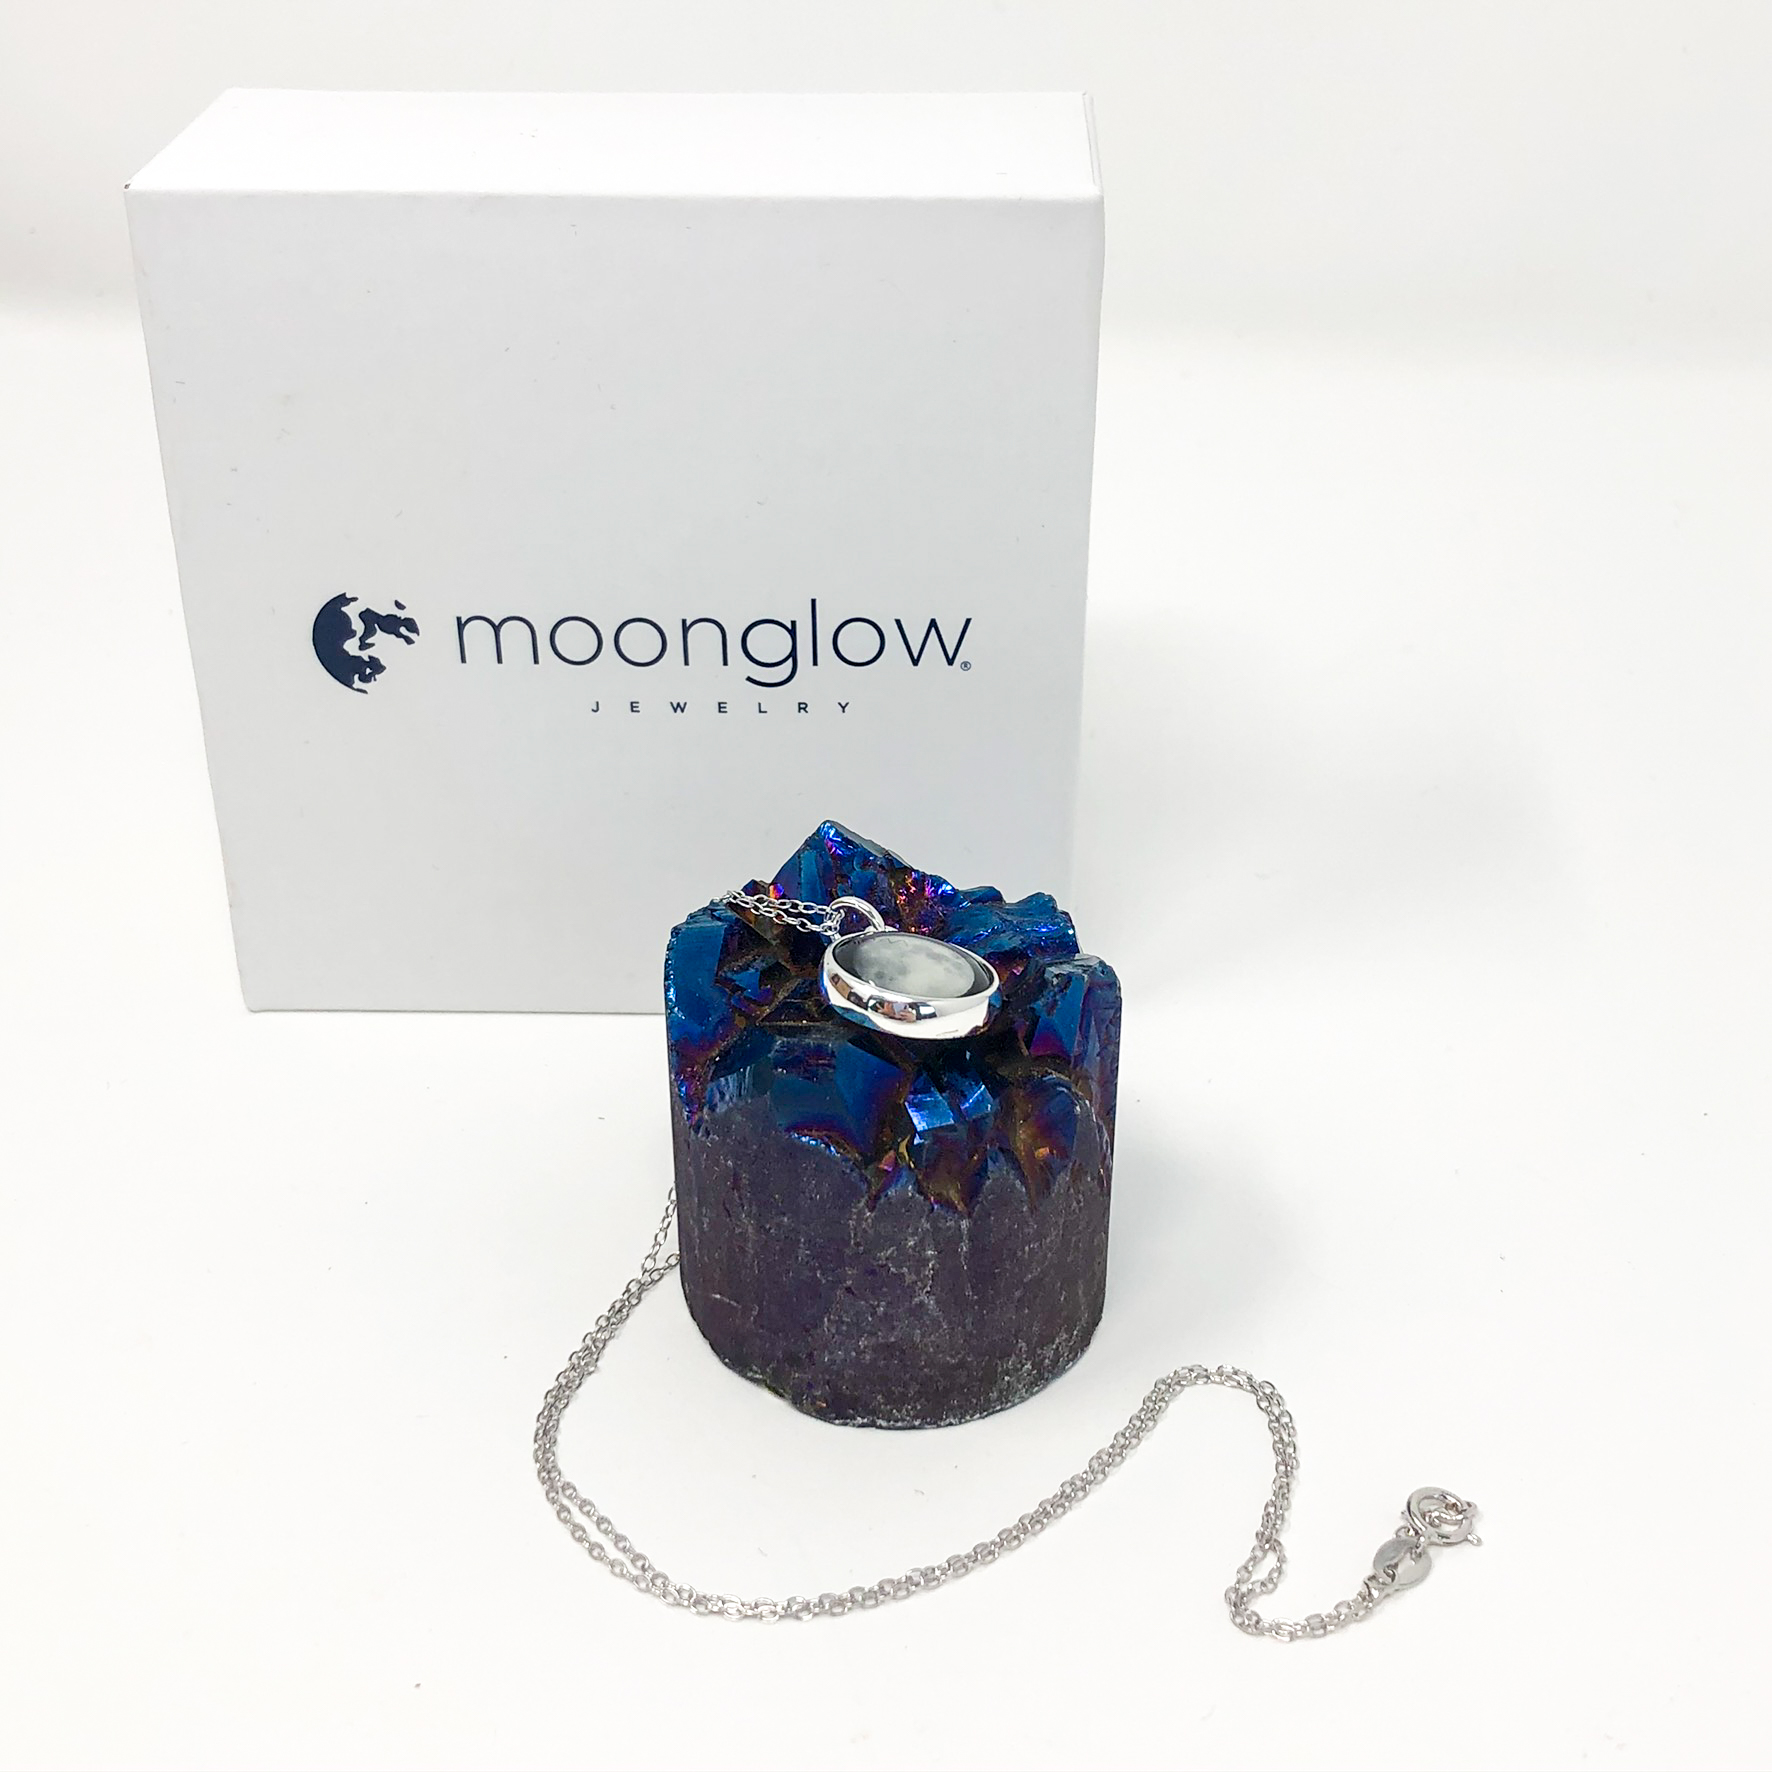 Moonglow necklace